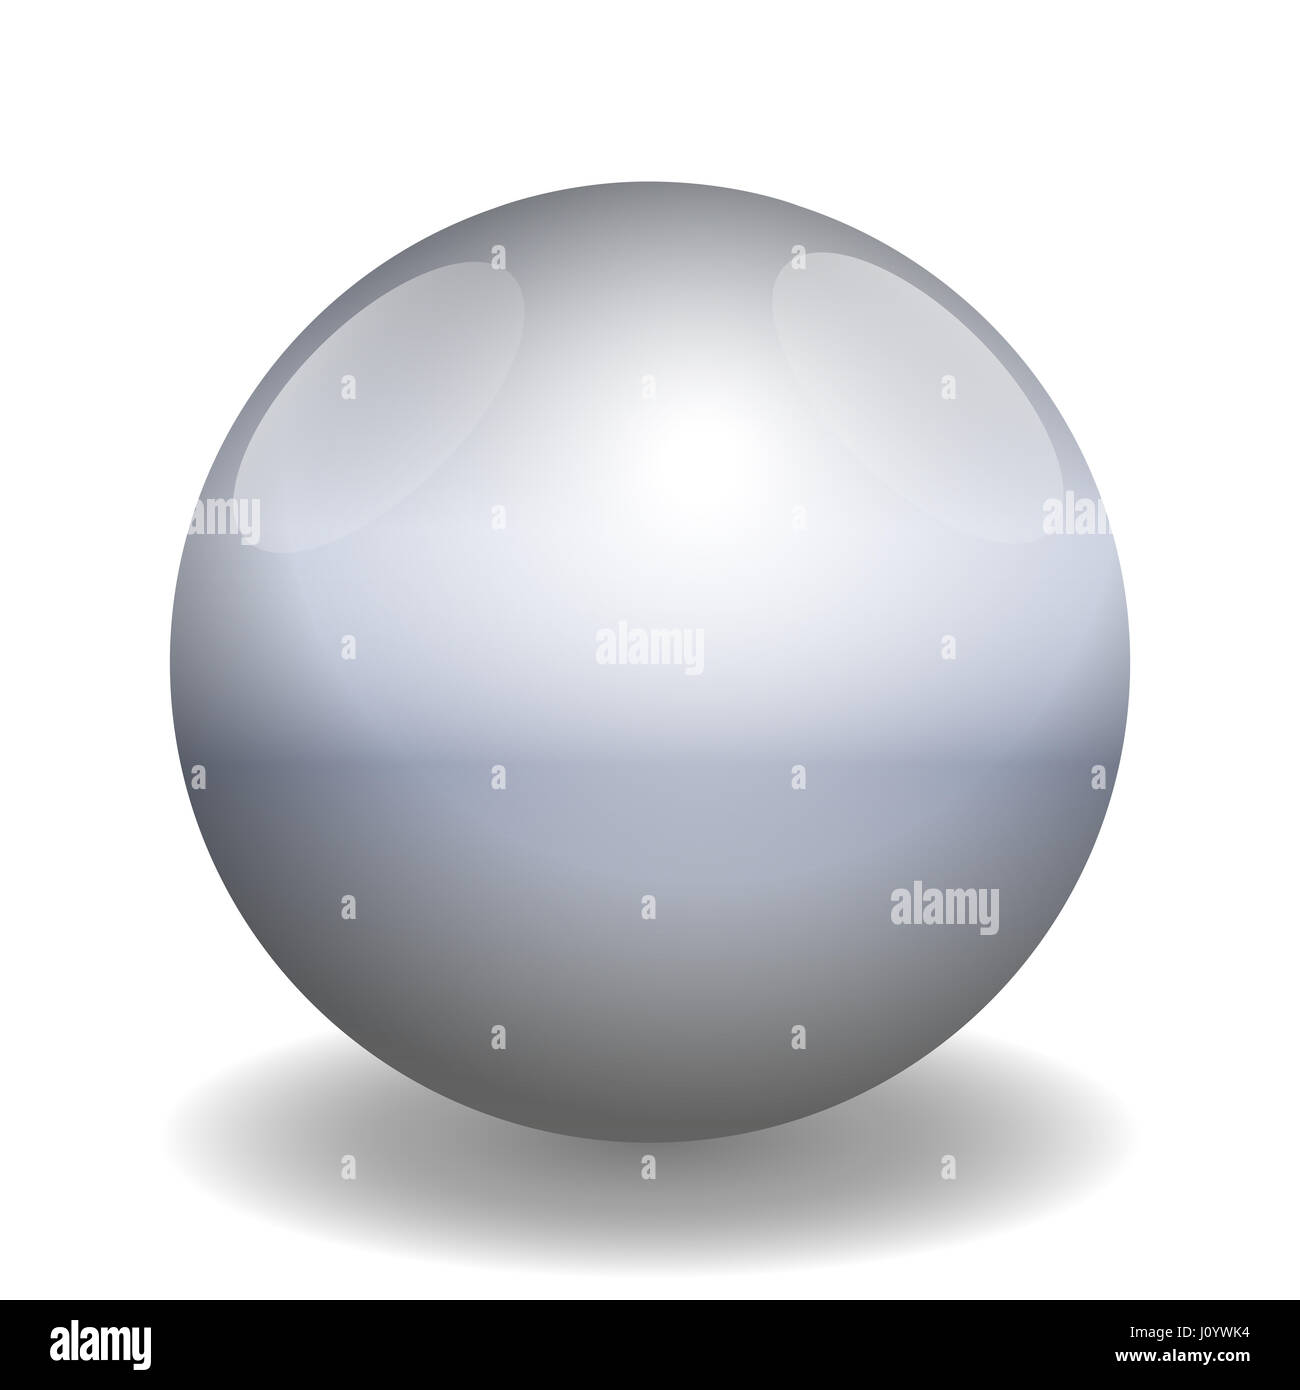 Iron ball - illustration of a single metallic glossy gray ball with reflections of light and shadow - three-dimensional on white background Stock Photo